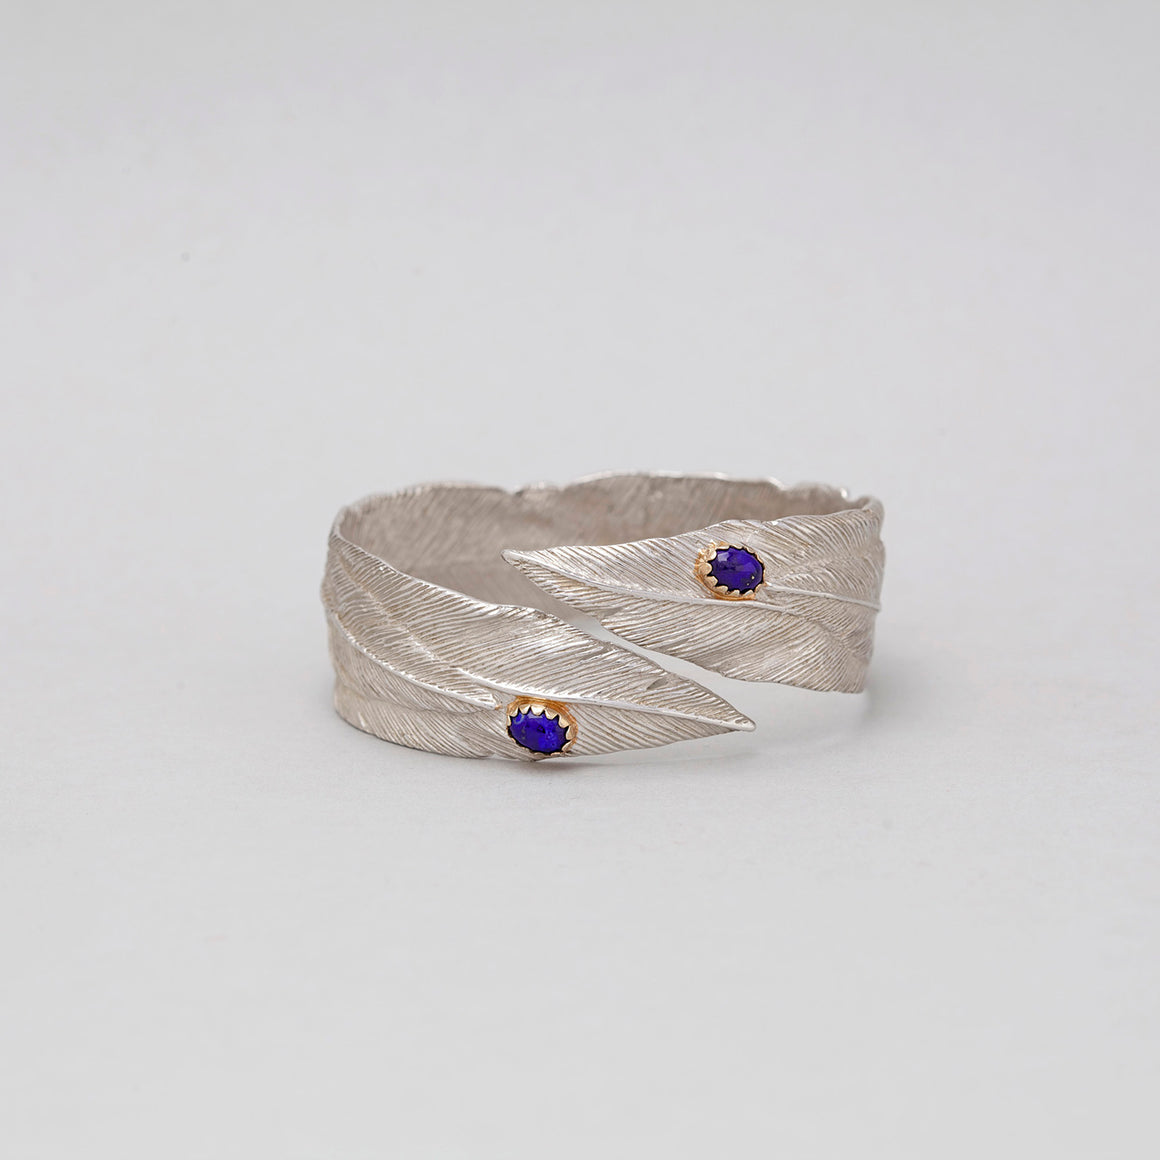 STERLING SILVER FEATHER BANGLE WITH LAPIS